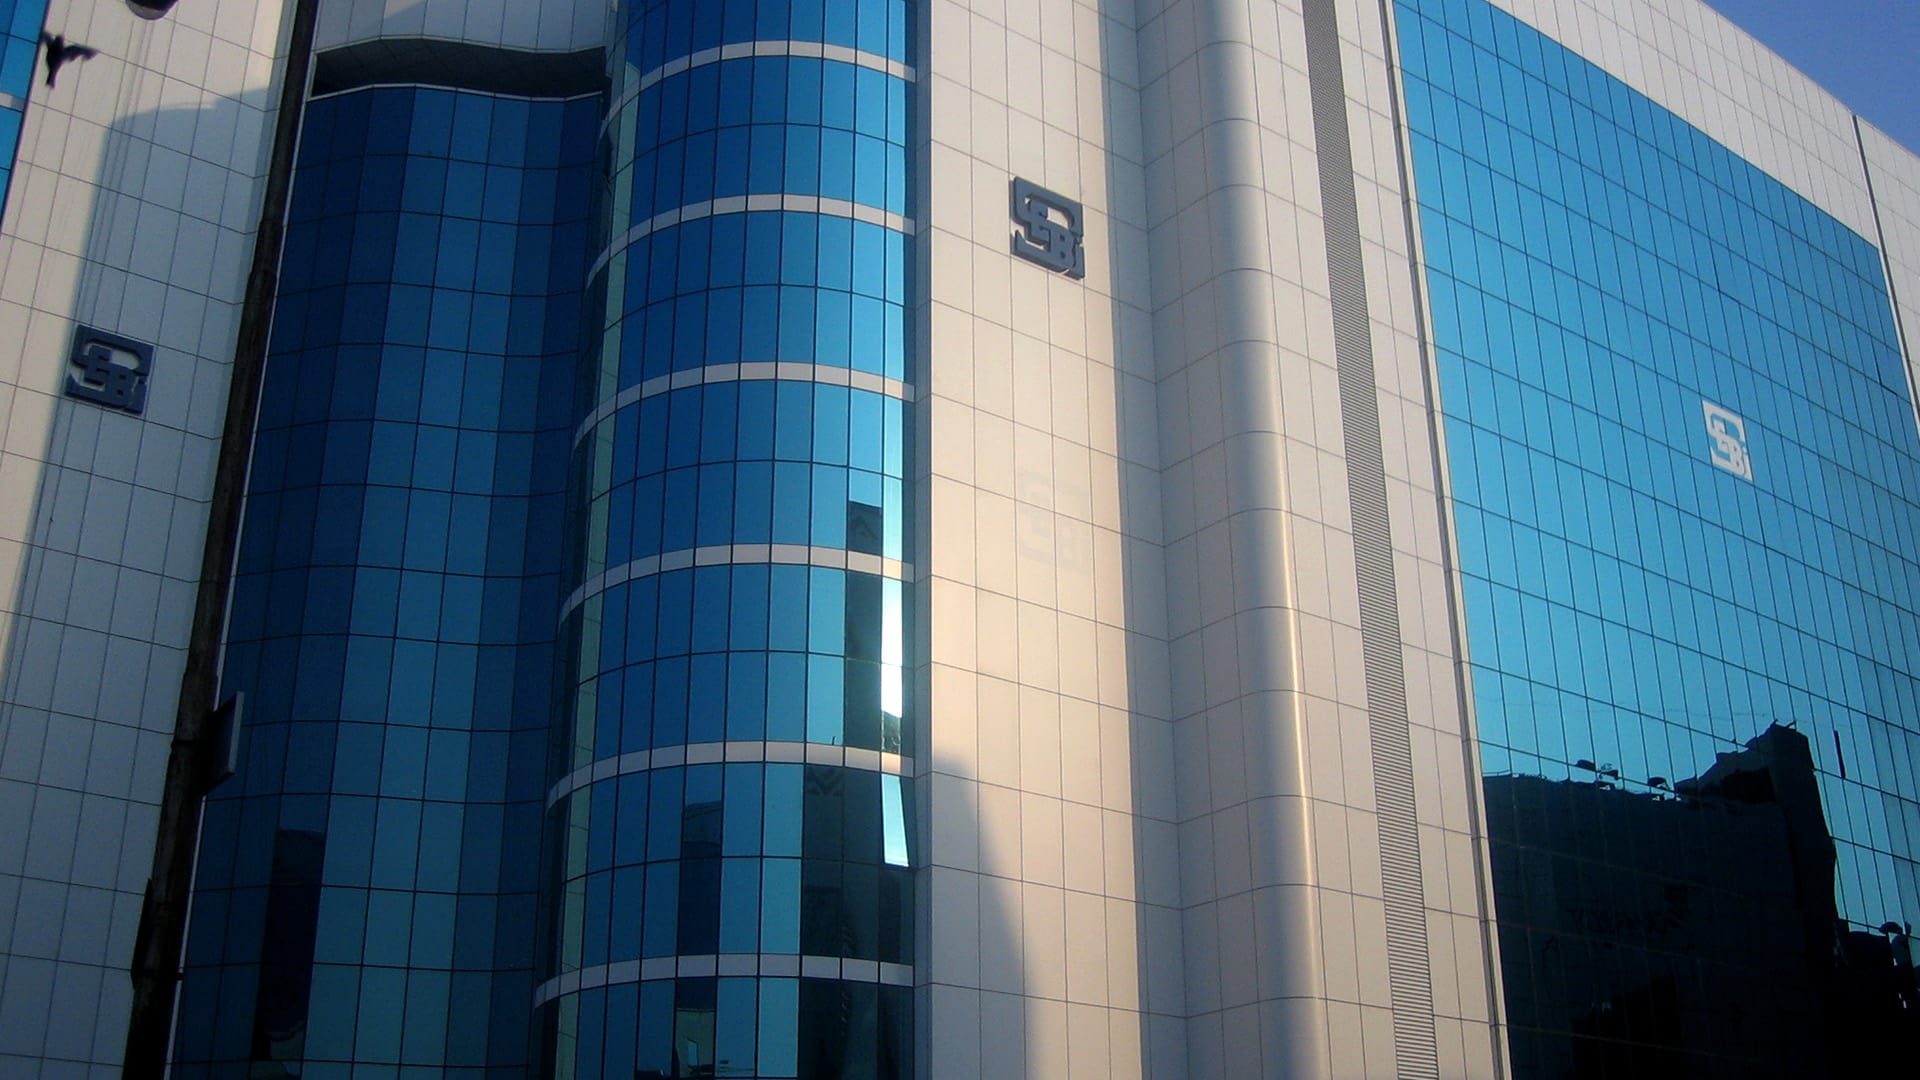 Sebi amends rules; introduces new option for appointment, removal of independent directors